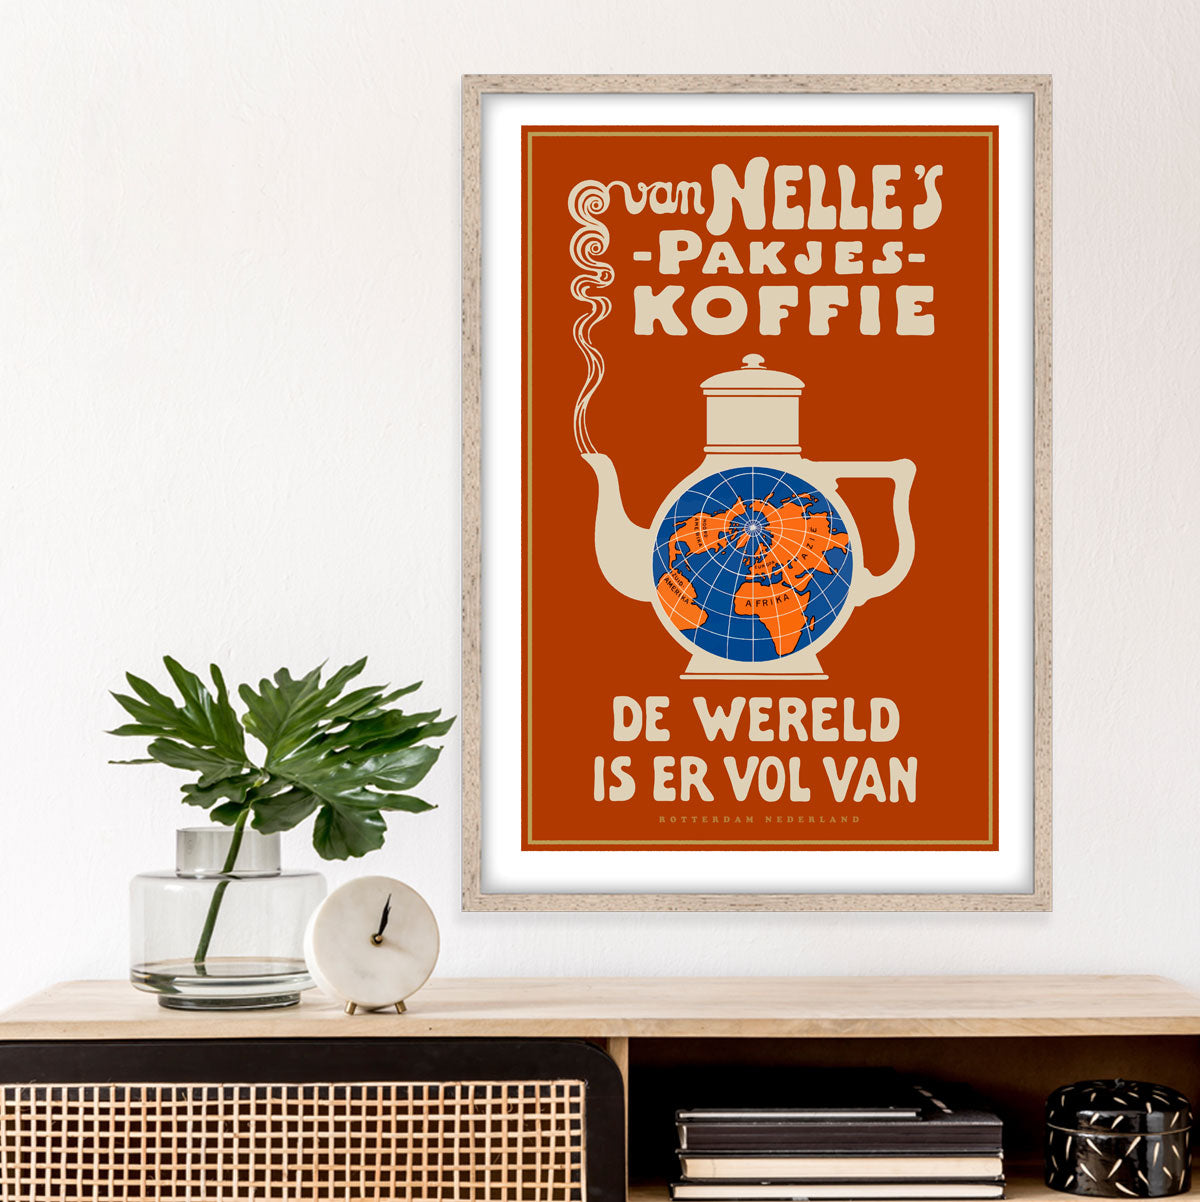 Van Nelles Coffee Netherlands retro vintage poster from Places We Luv